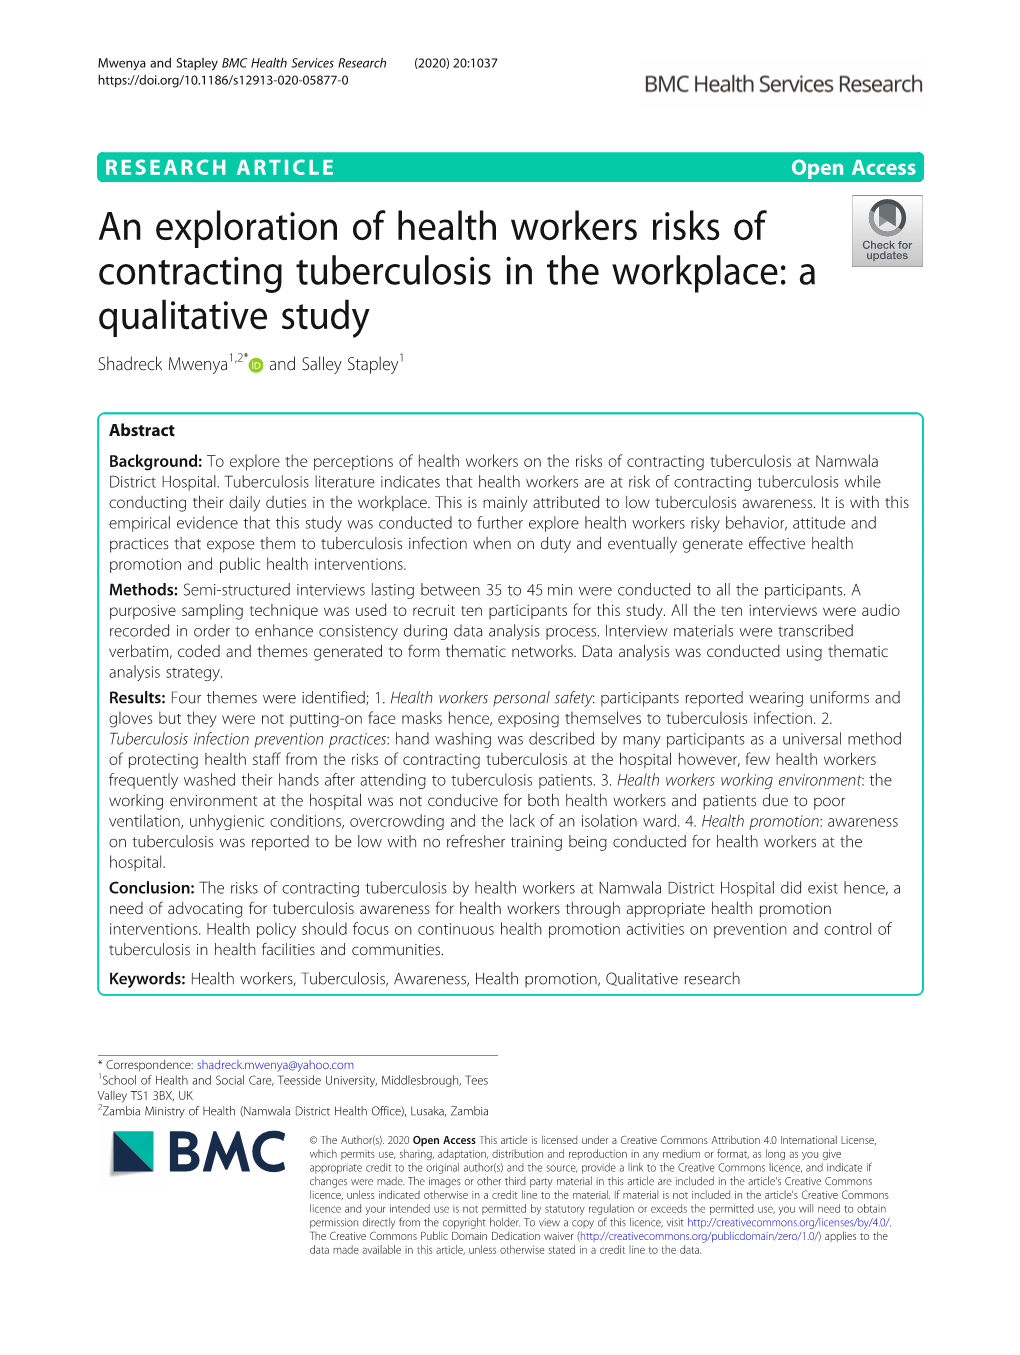 An Exploration of Health Workers Risks of Contracting Tuberculosis in the Workplace: a Qualitative Study Shadreck Mwenya1,2* and Salley Stapley1